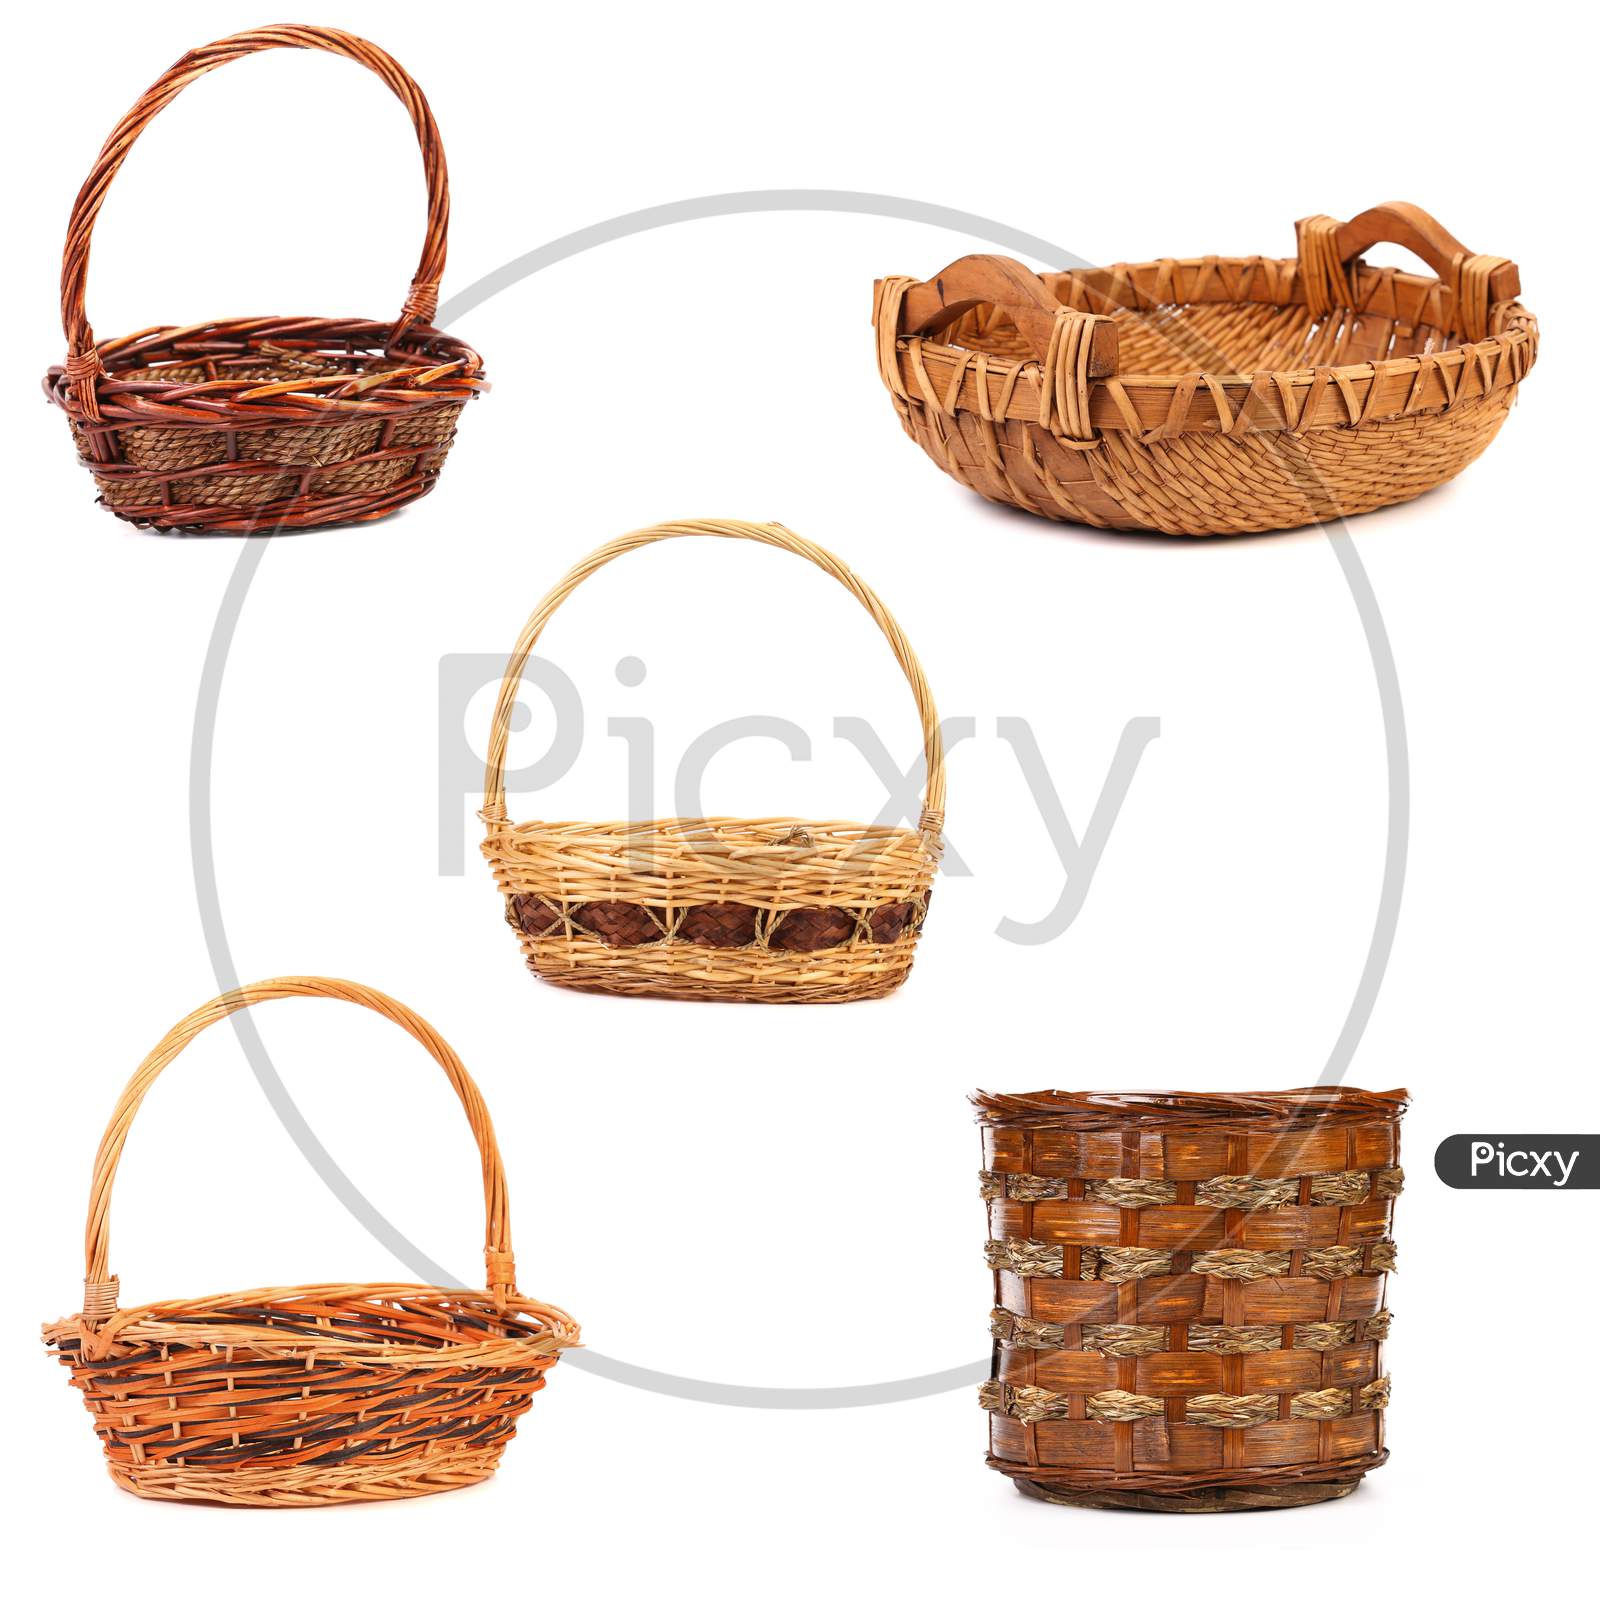 Vintage Weave Wicker Baskets. Isolated On White Background